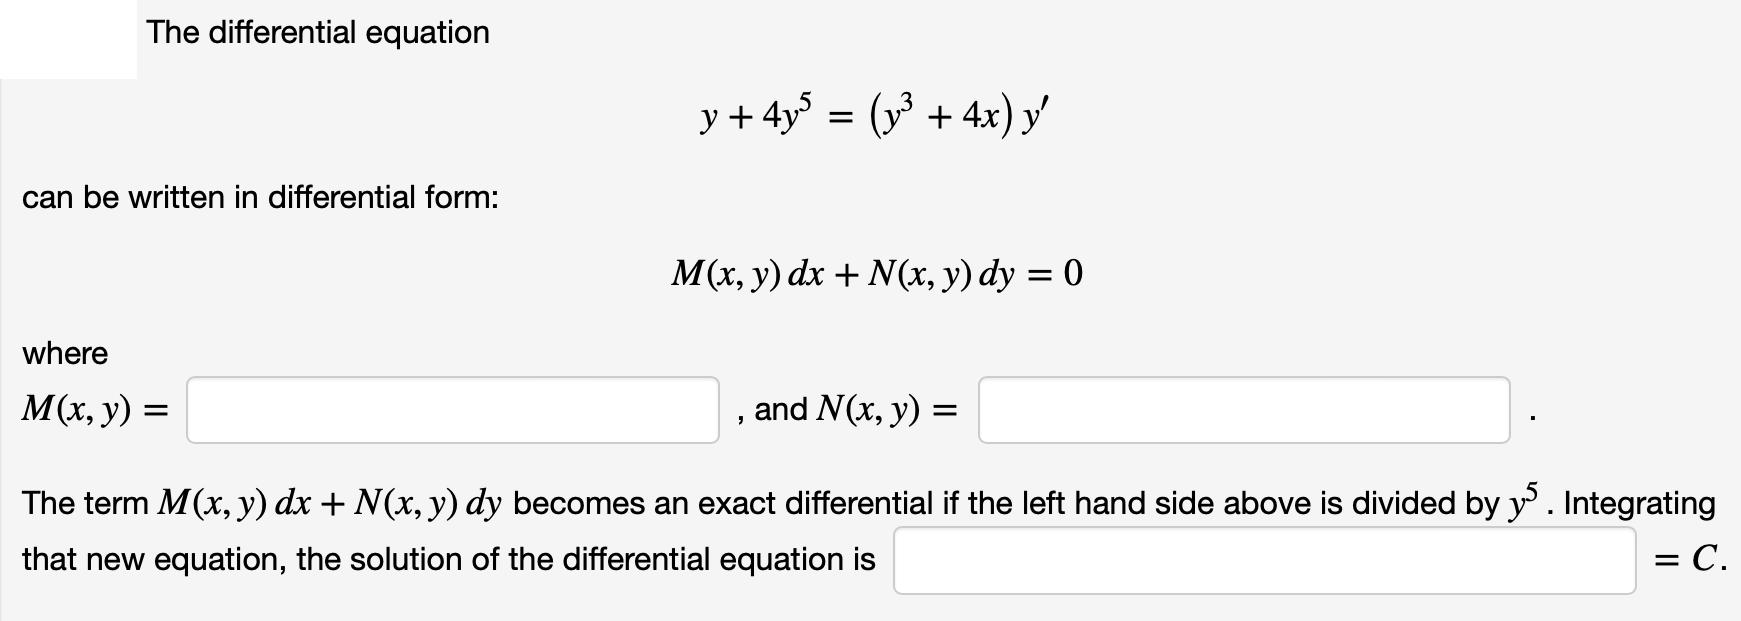 The differential equation can be written in differential form: where M(x, y) = y + 4y5 = (y + 4x) y' M(x, y)